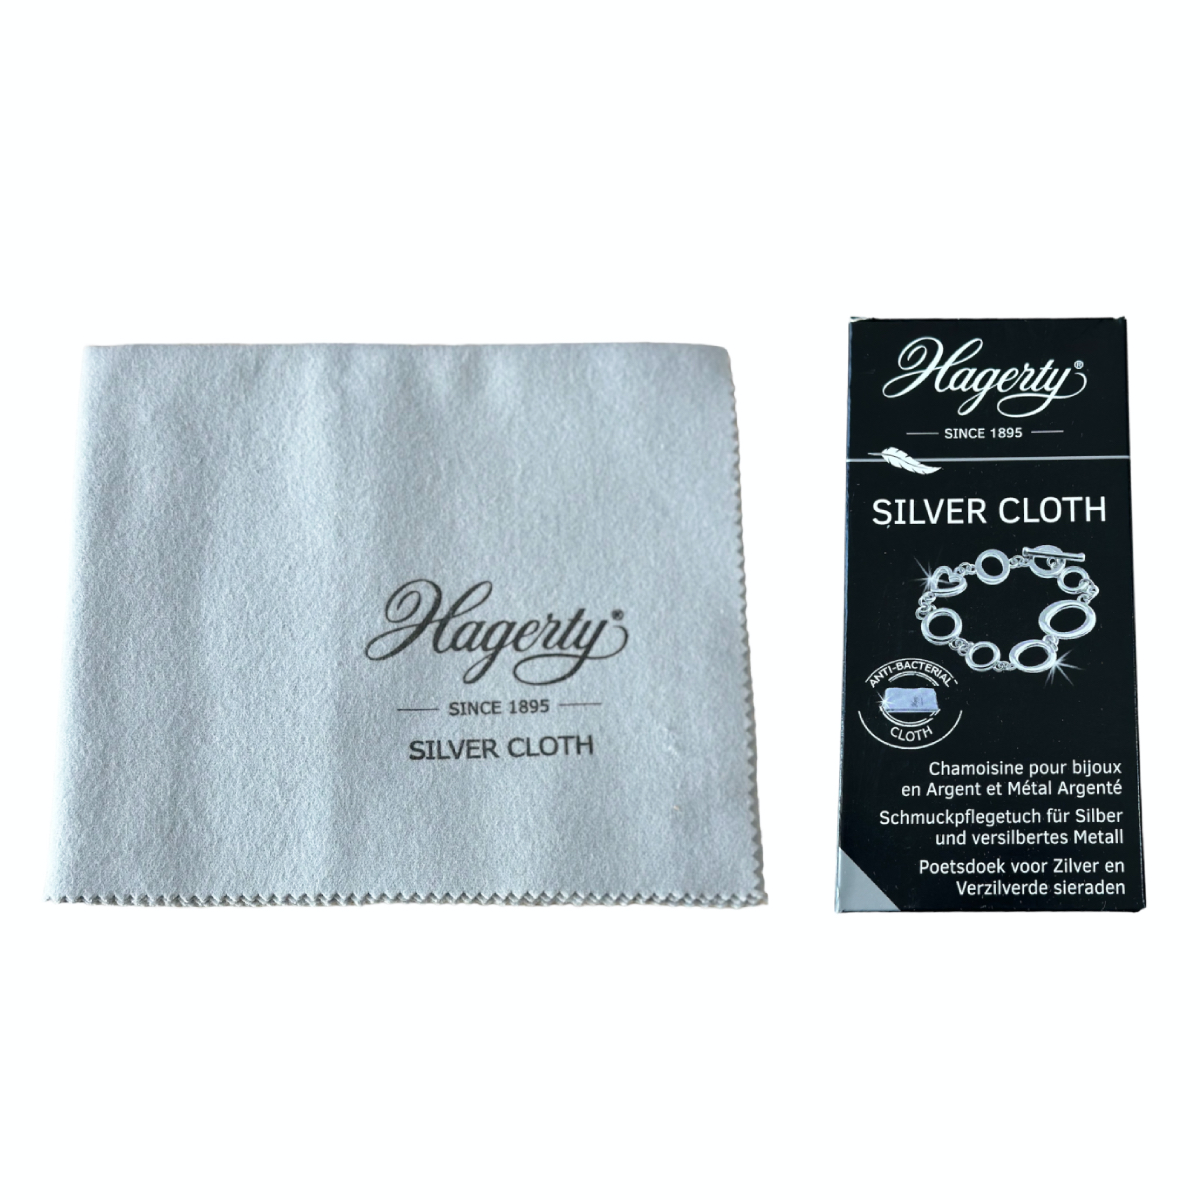 Silbo Cleaning Cloth for Silver Jewelry, Cotton, 30 x 24 cm